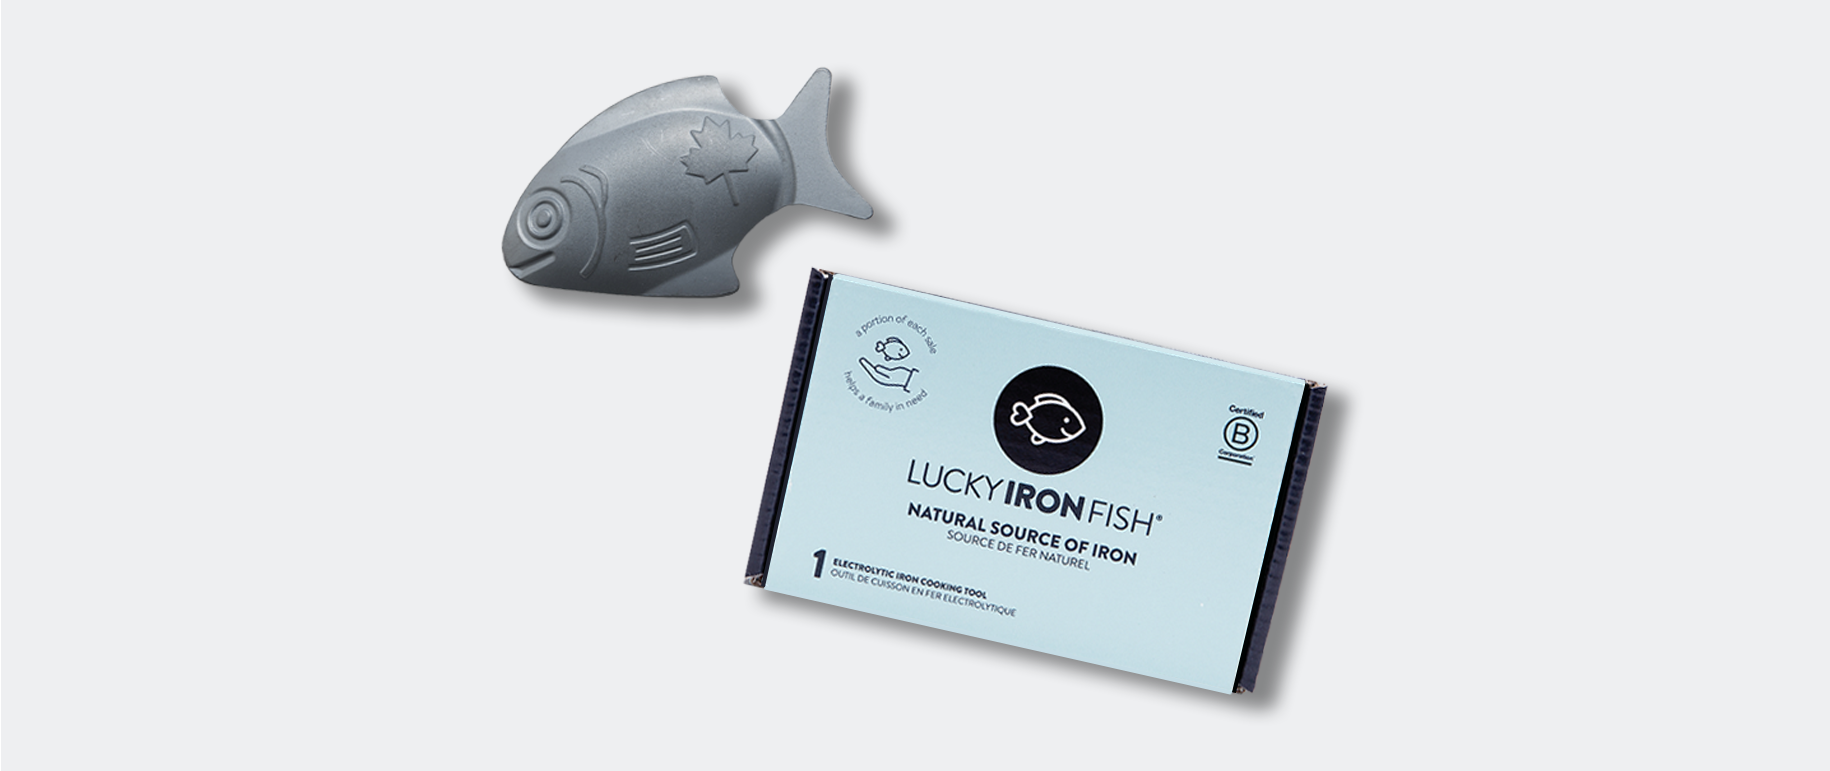 Lisol Cooking Tool to Add Safe Iron to Food and Water, 2 Pack Iron Fish - A Natural Source of Iron, An Iron Supplement Alternative, Suitable for